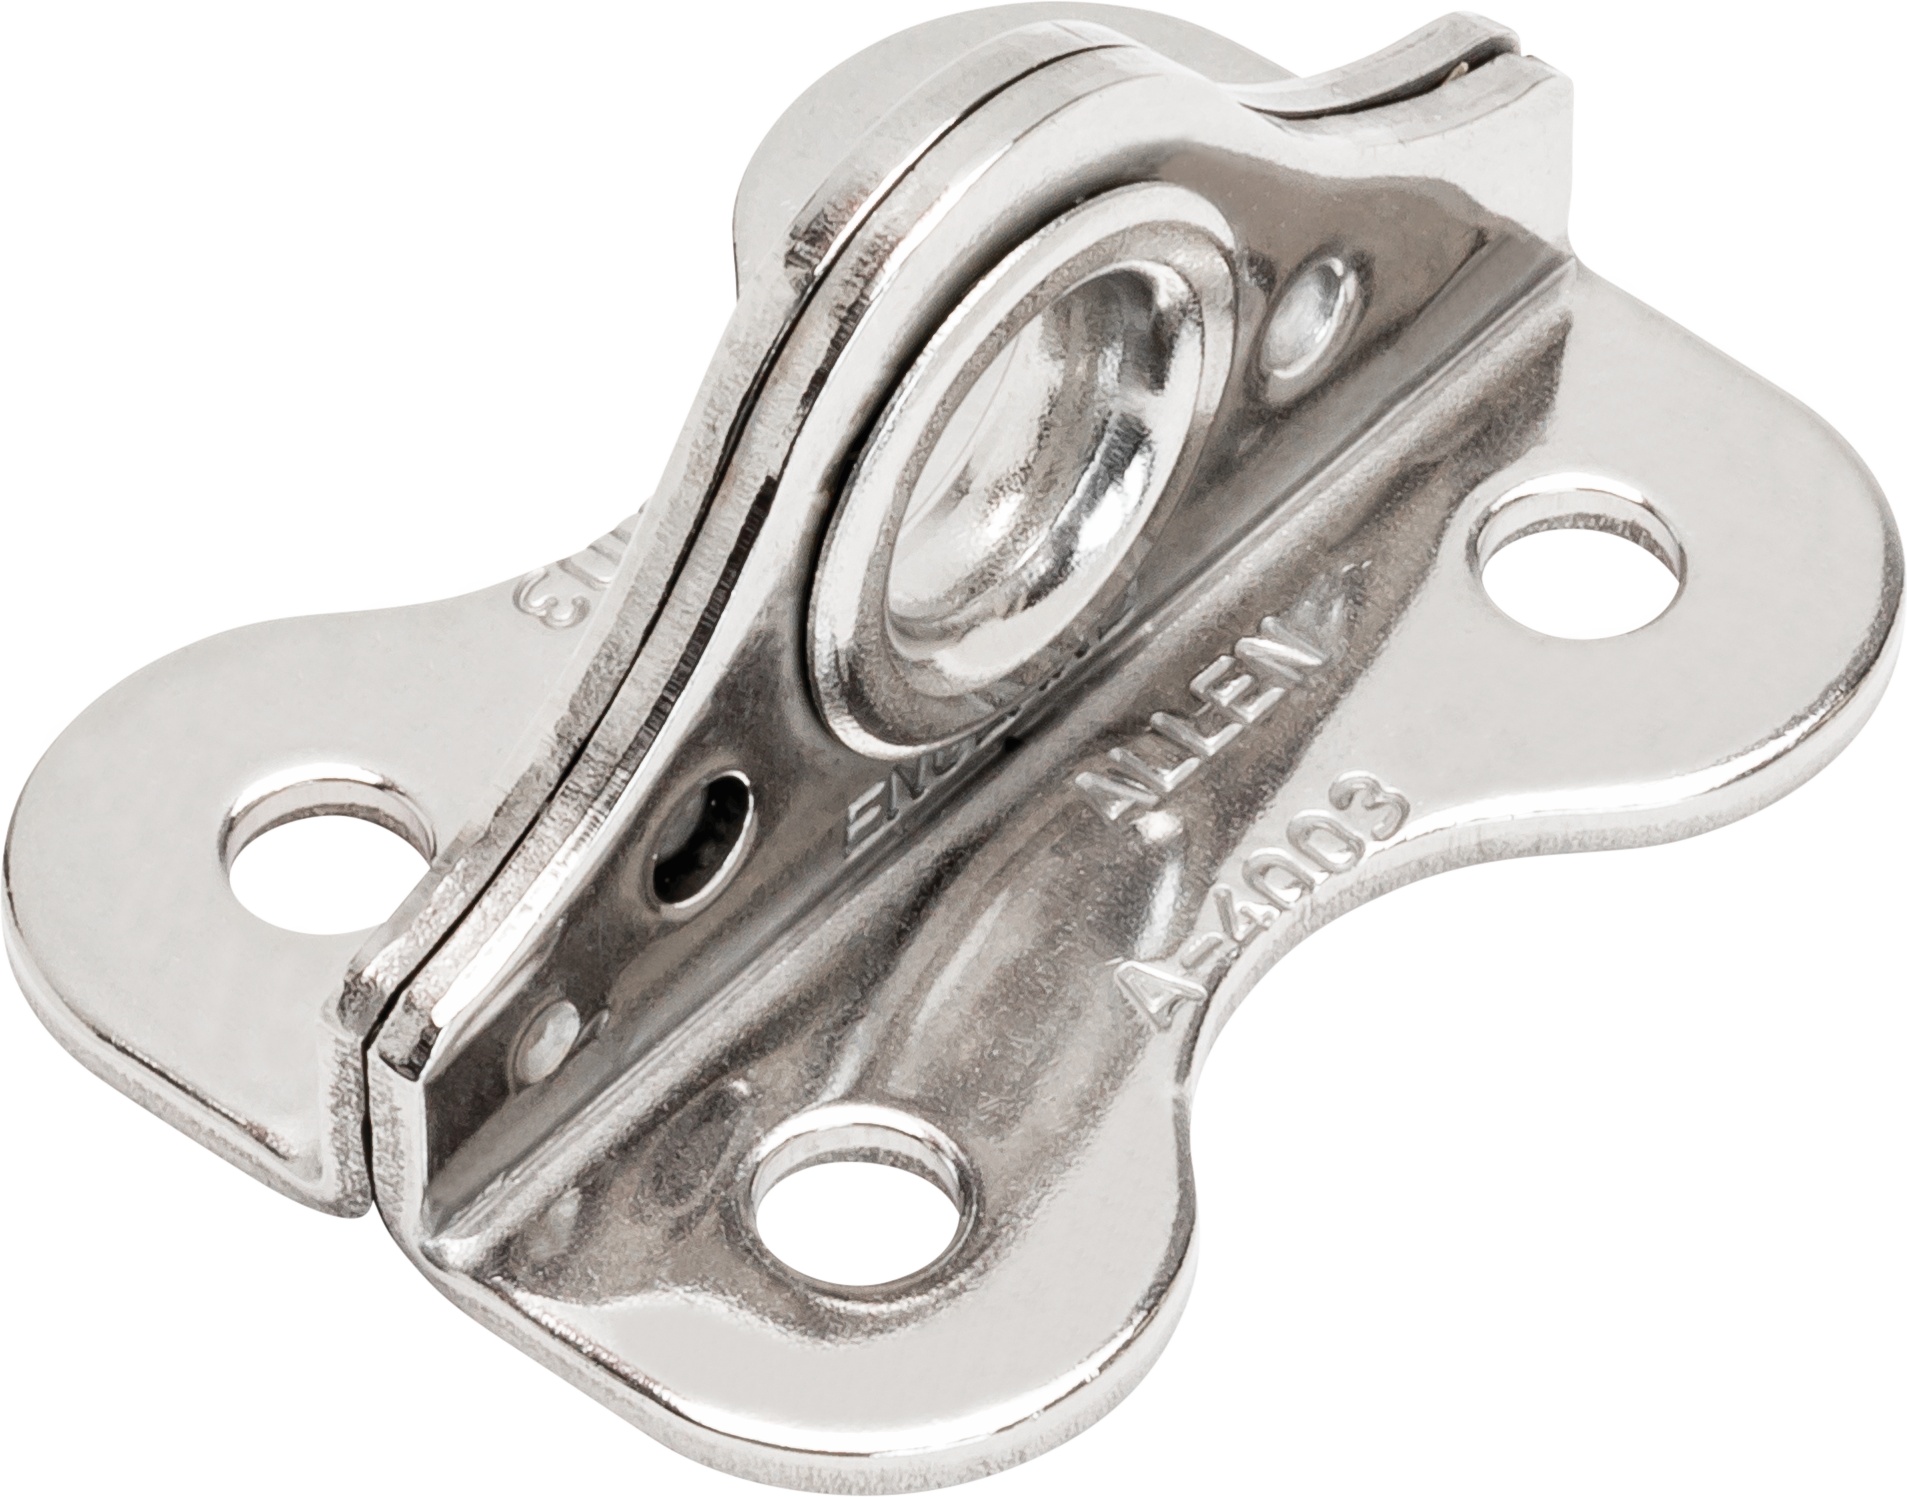 Stainless Steel Flat Anchor Plate With Ferrule » Allen | Performance ...